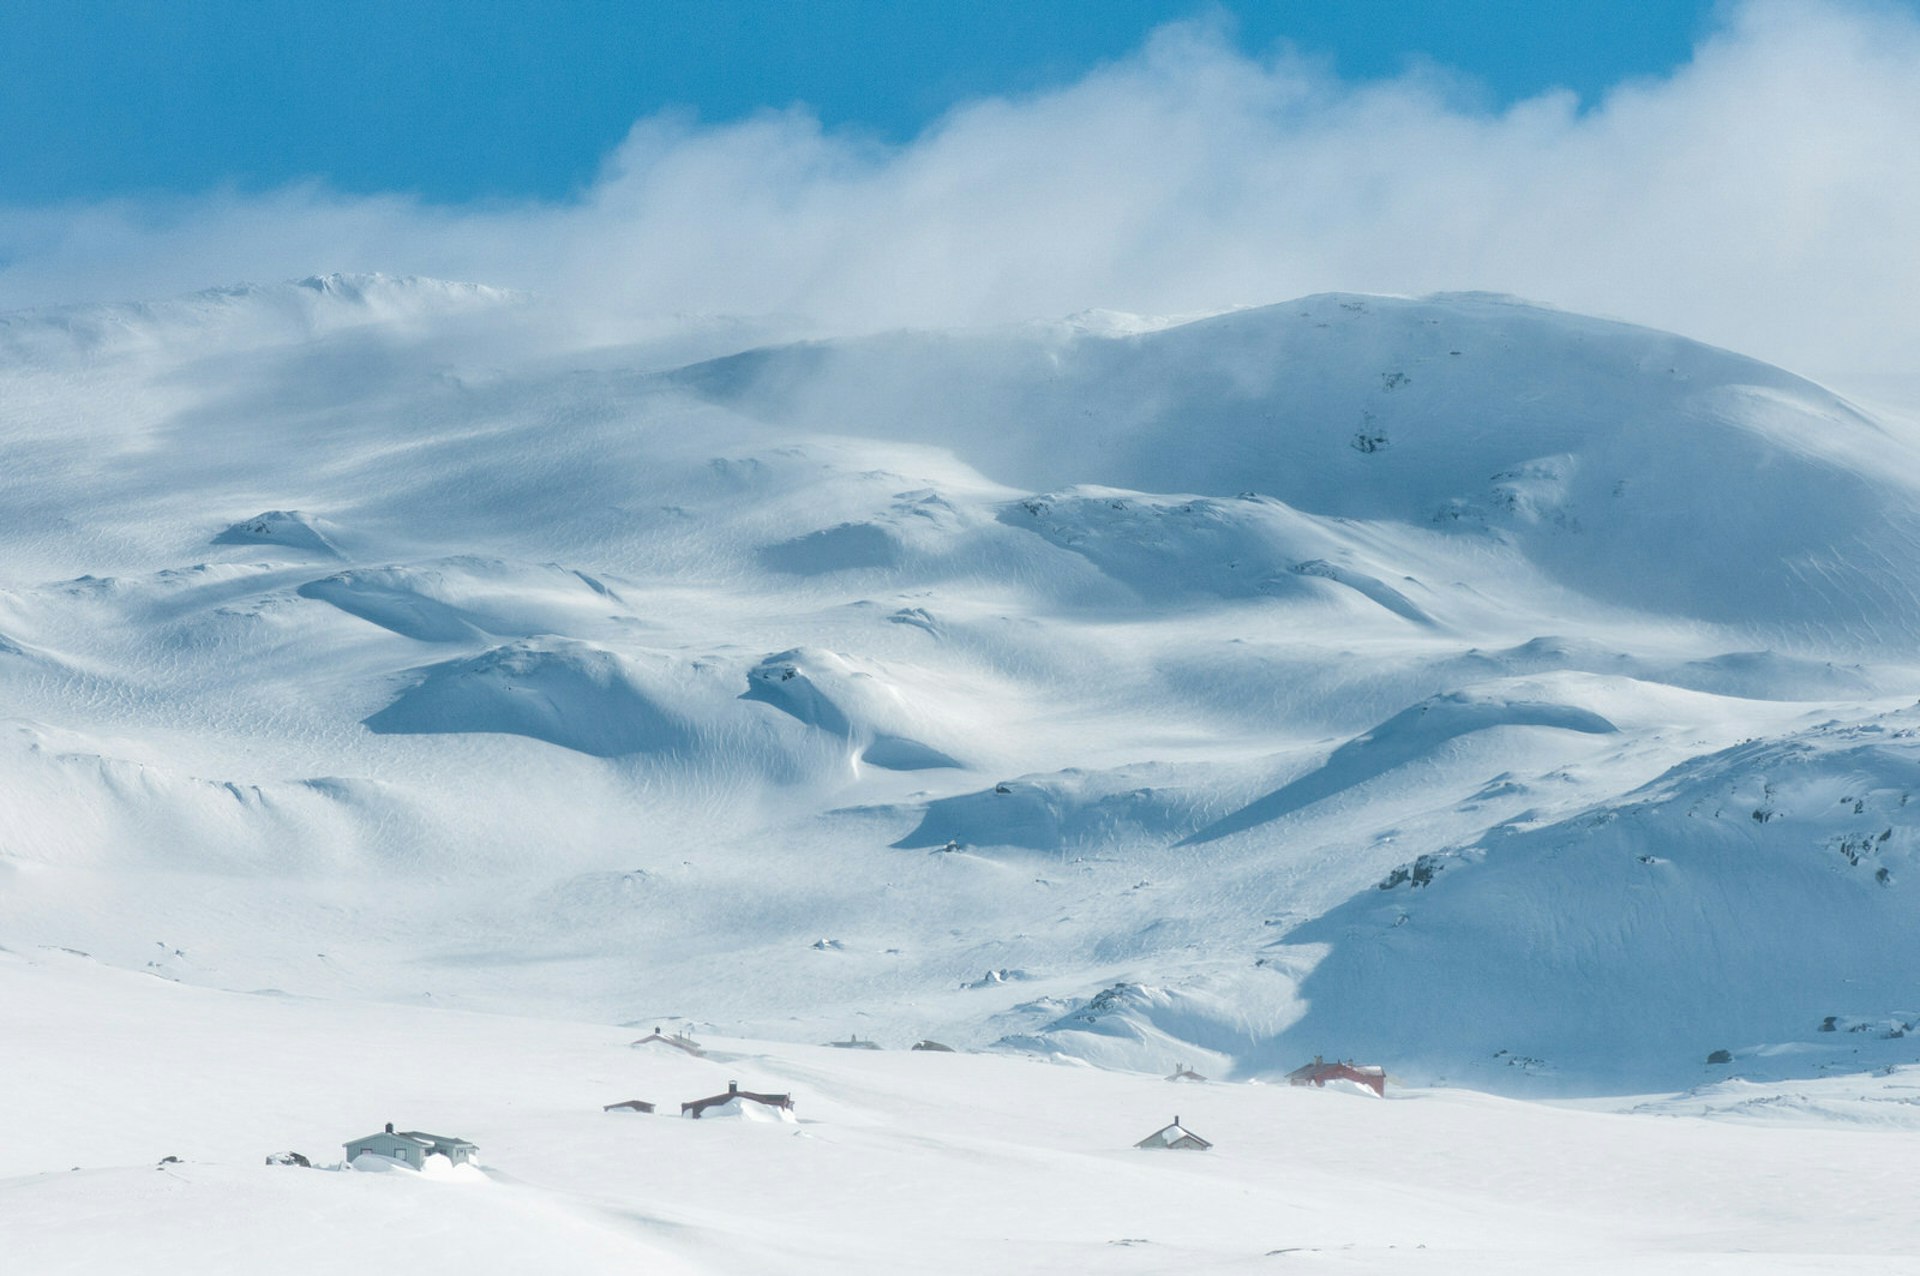 Snow drifts off the top of a range of snow-covered mountains. At the base are small lodgings nestled in the snow